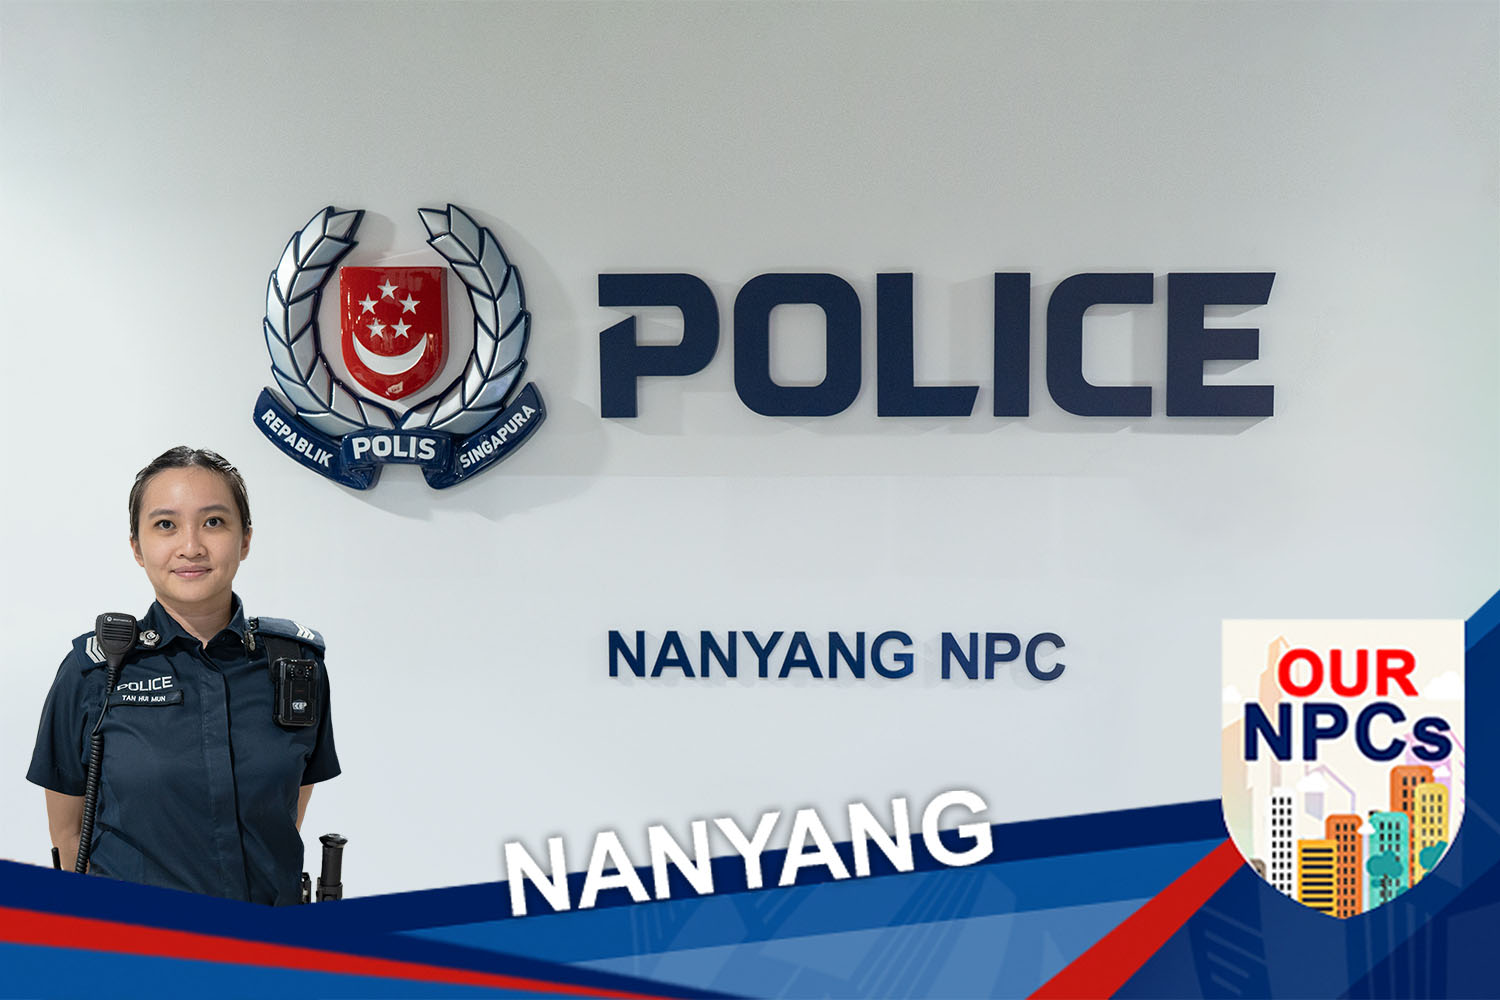 photo of female police officer standing infront of a police signage that says nanyang npc